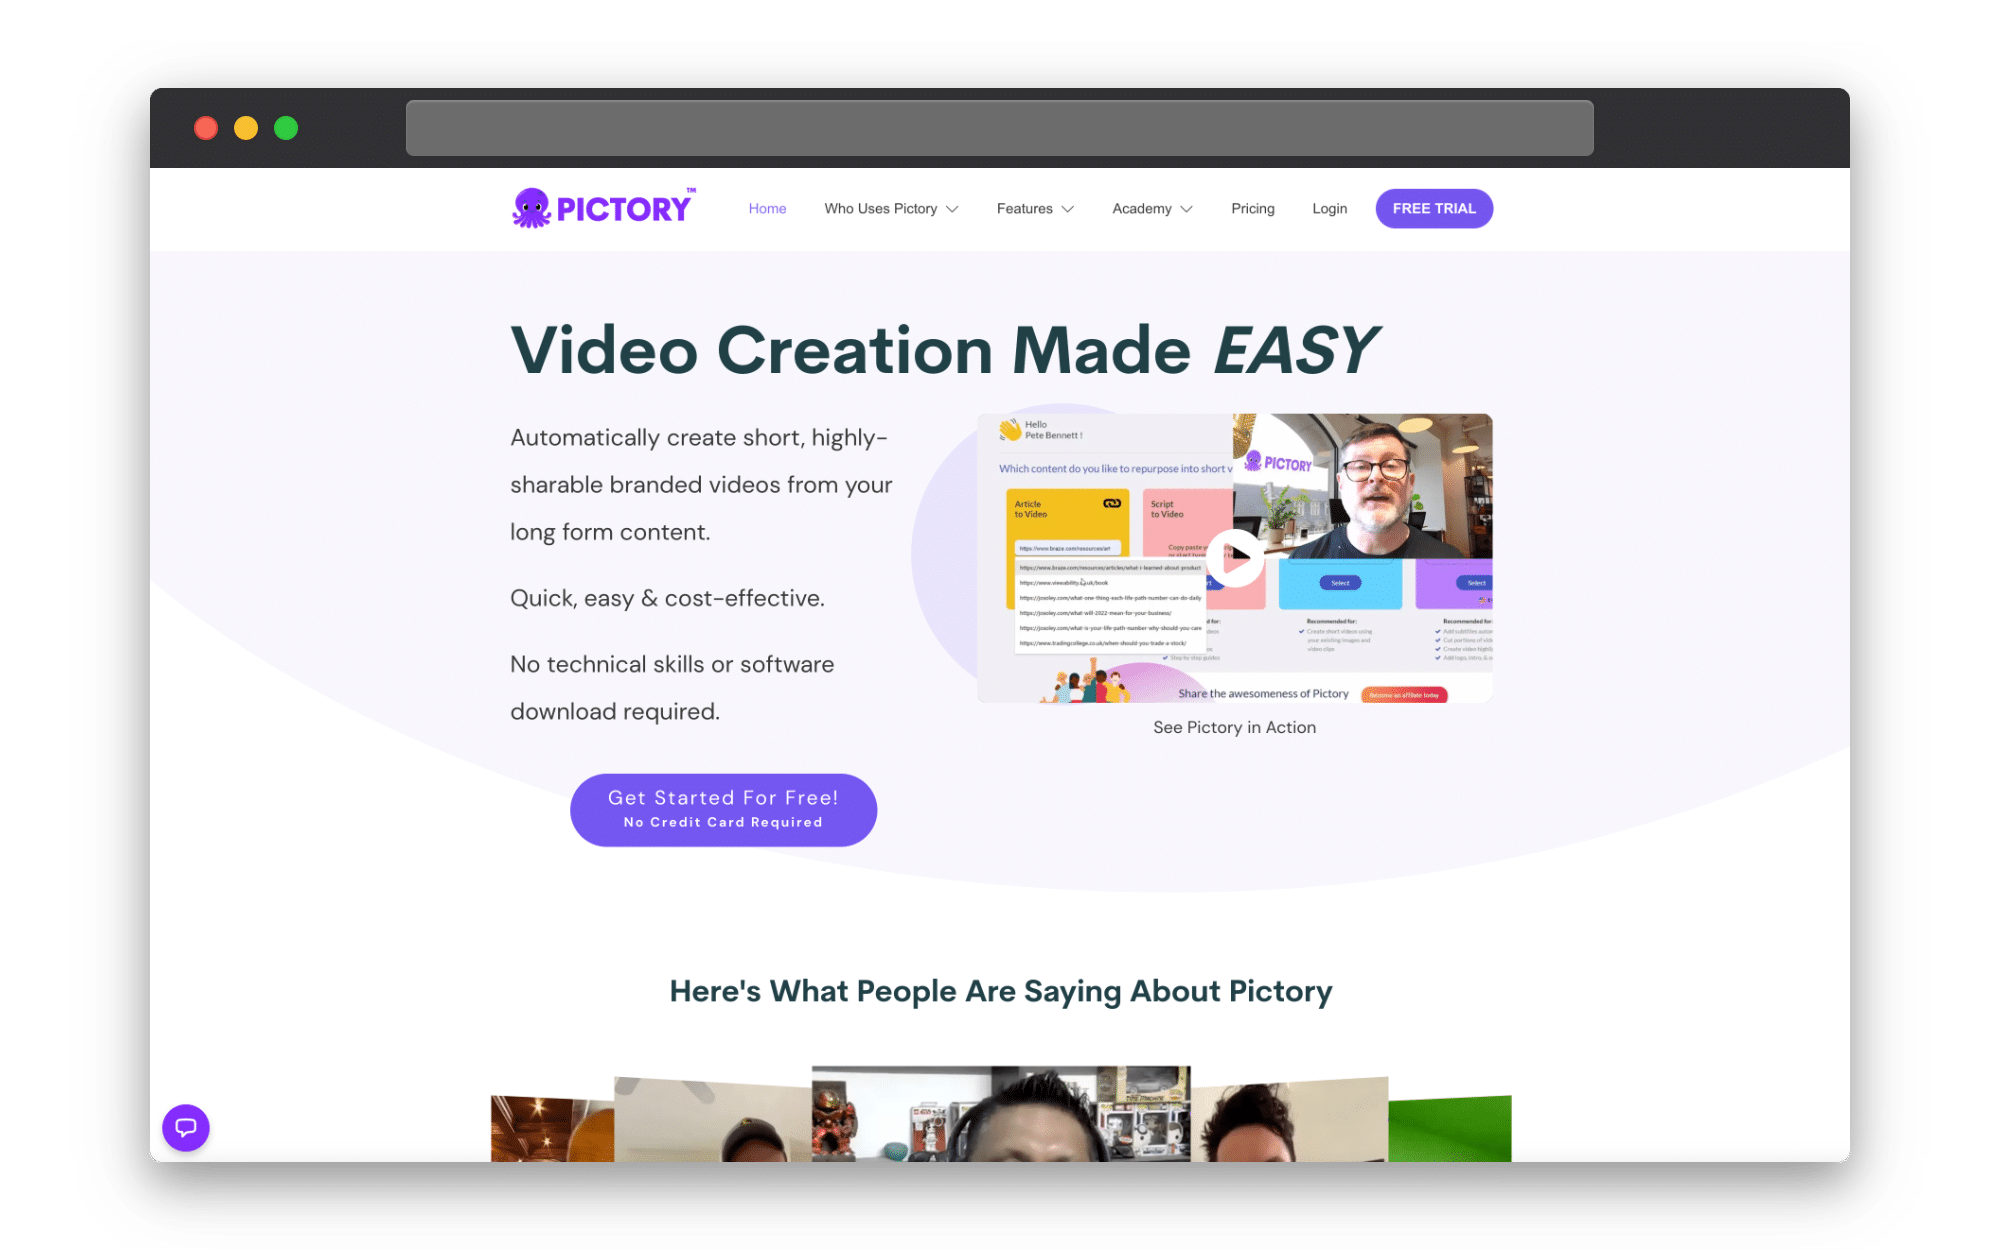 Pictory is an AI video generator that analyses your text and creates video in minutes with a vast library of licensed stock footage, ready for you to customize in our online video editor.